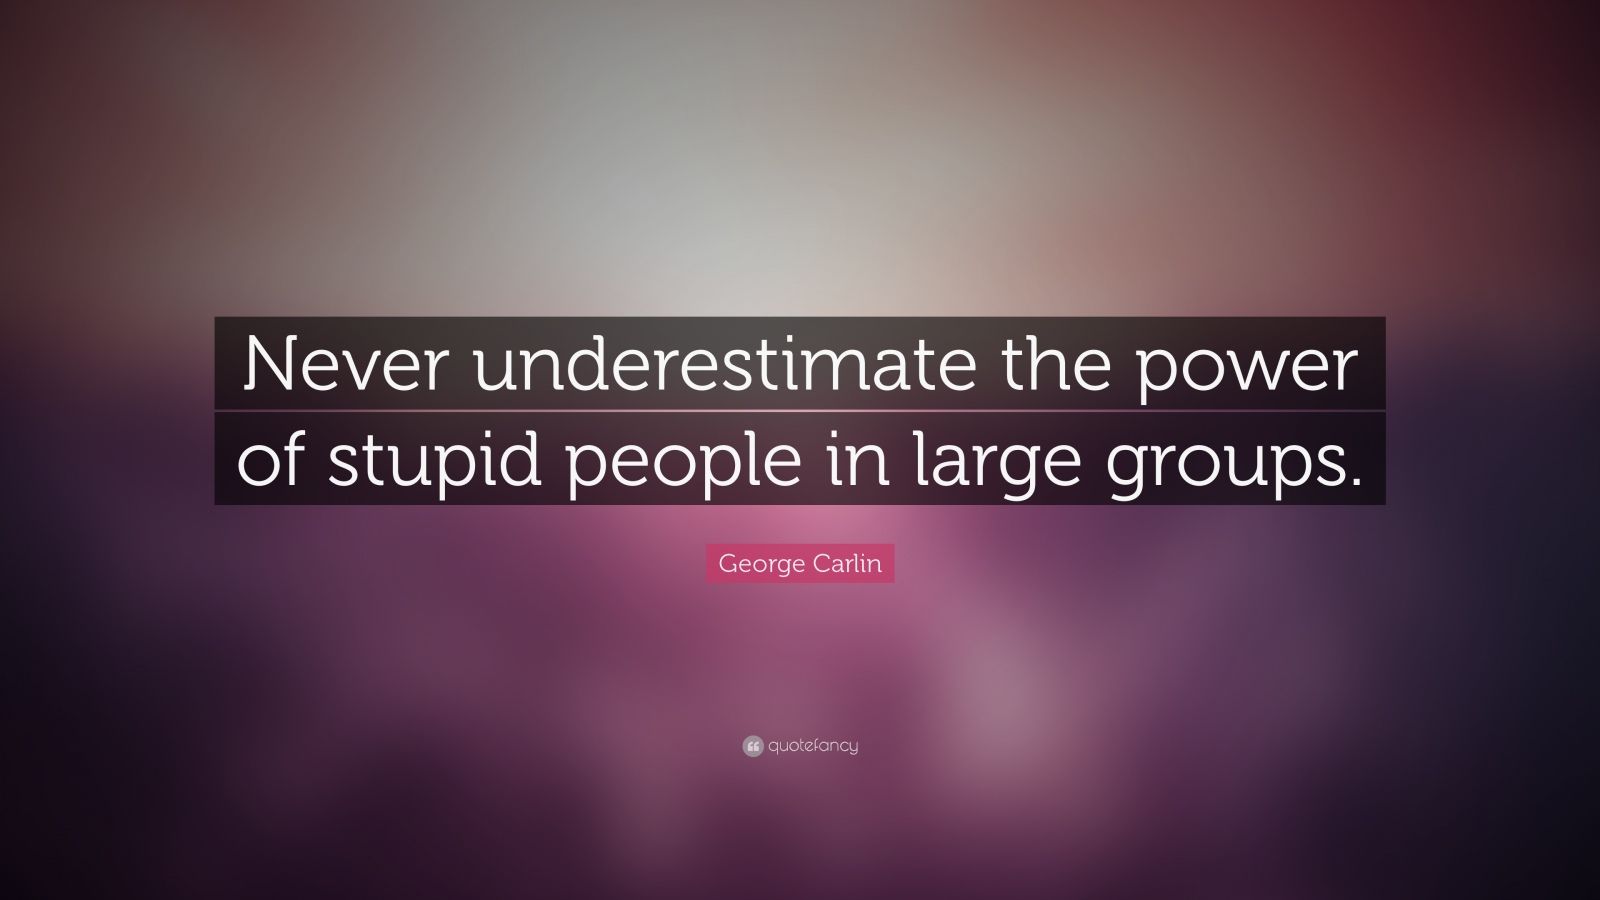 8750-George-Carlin-Quote-Never-underestimate-the-power-of-stupid-people.jpg